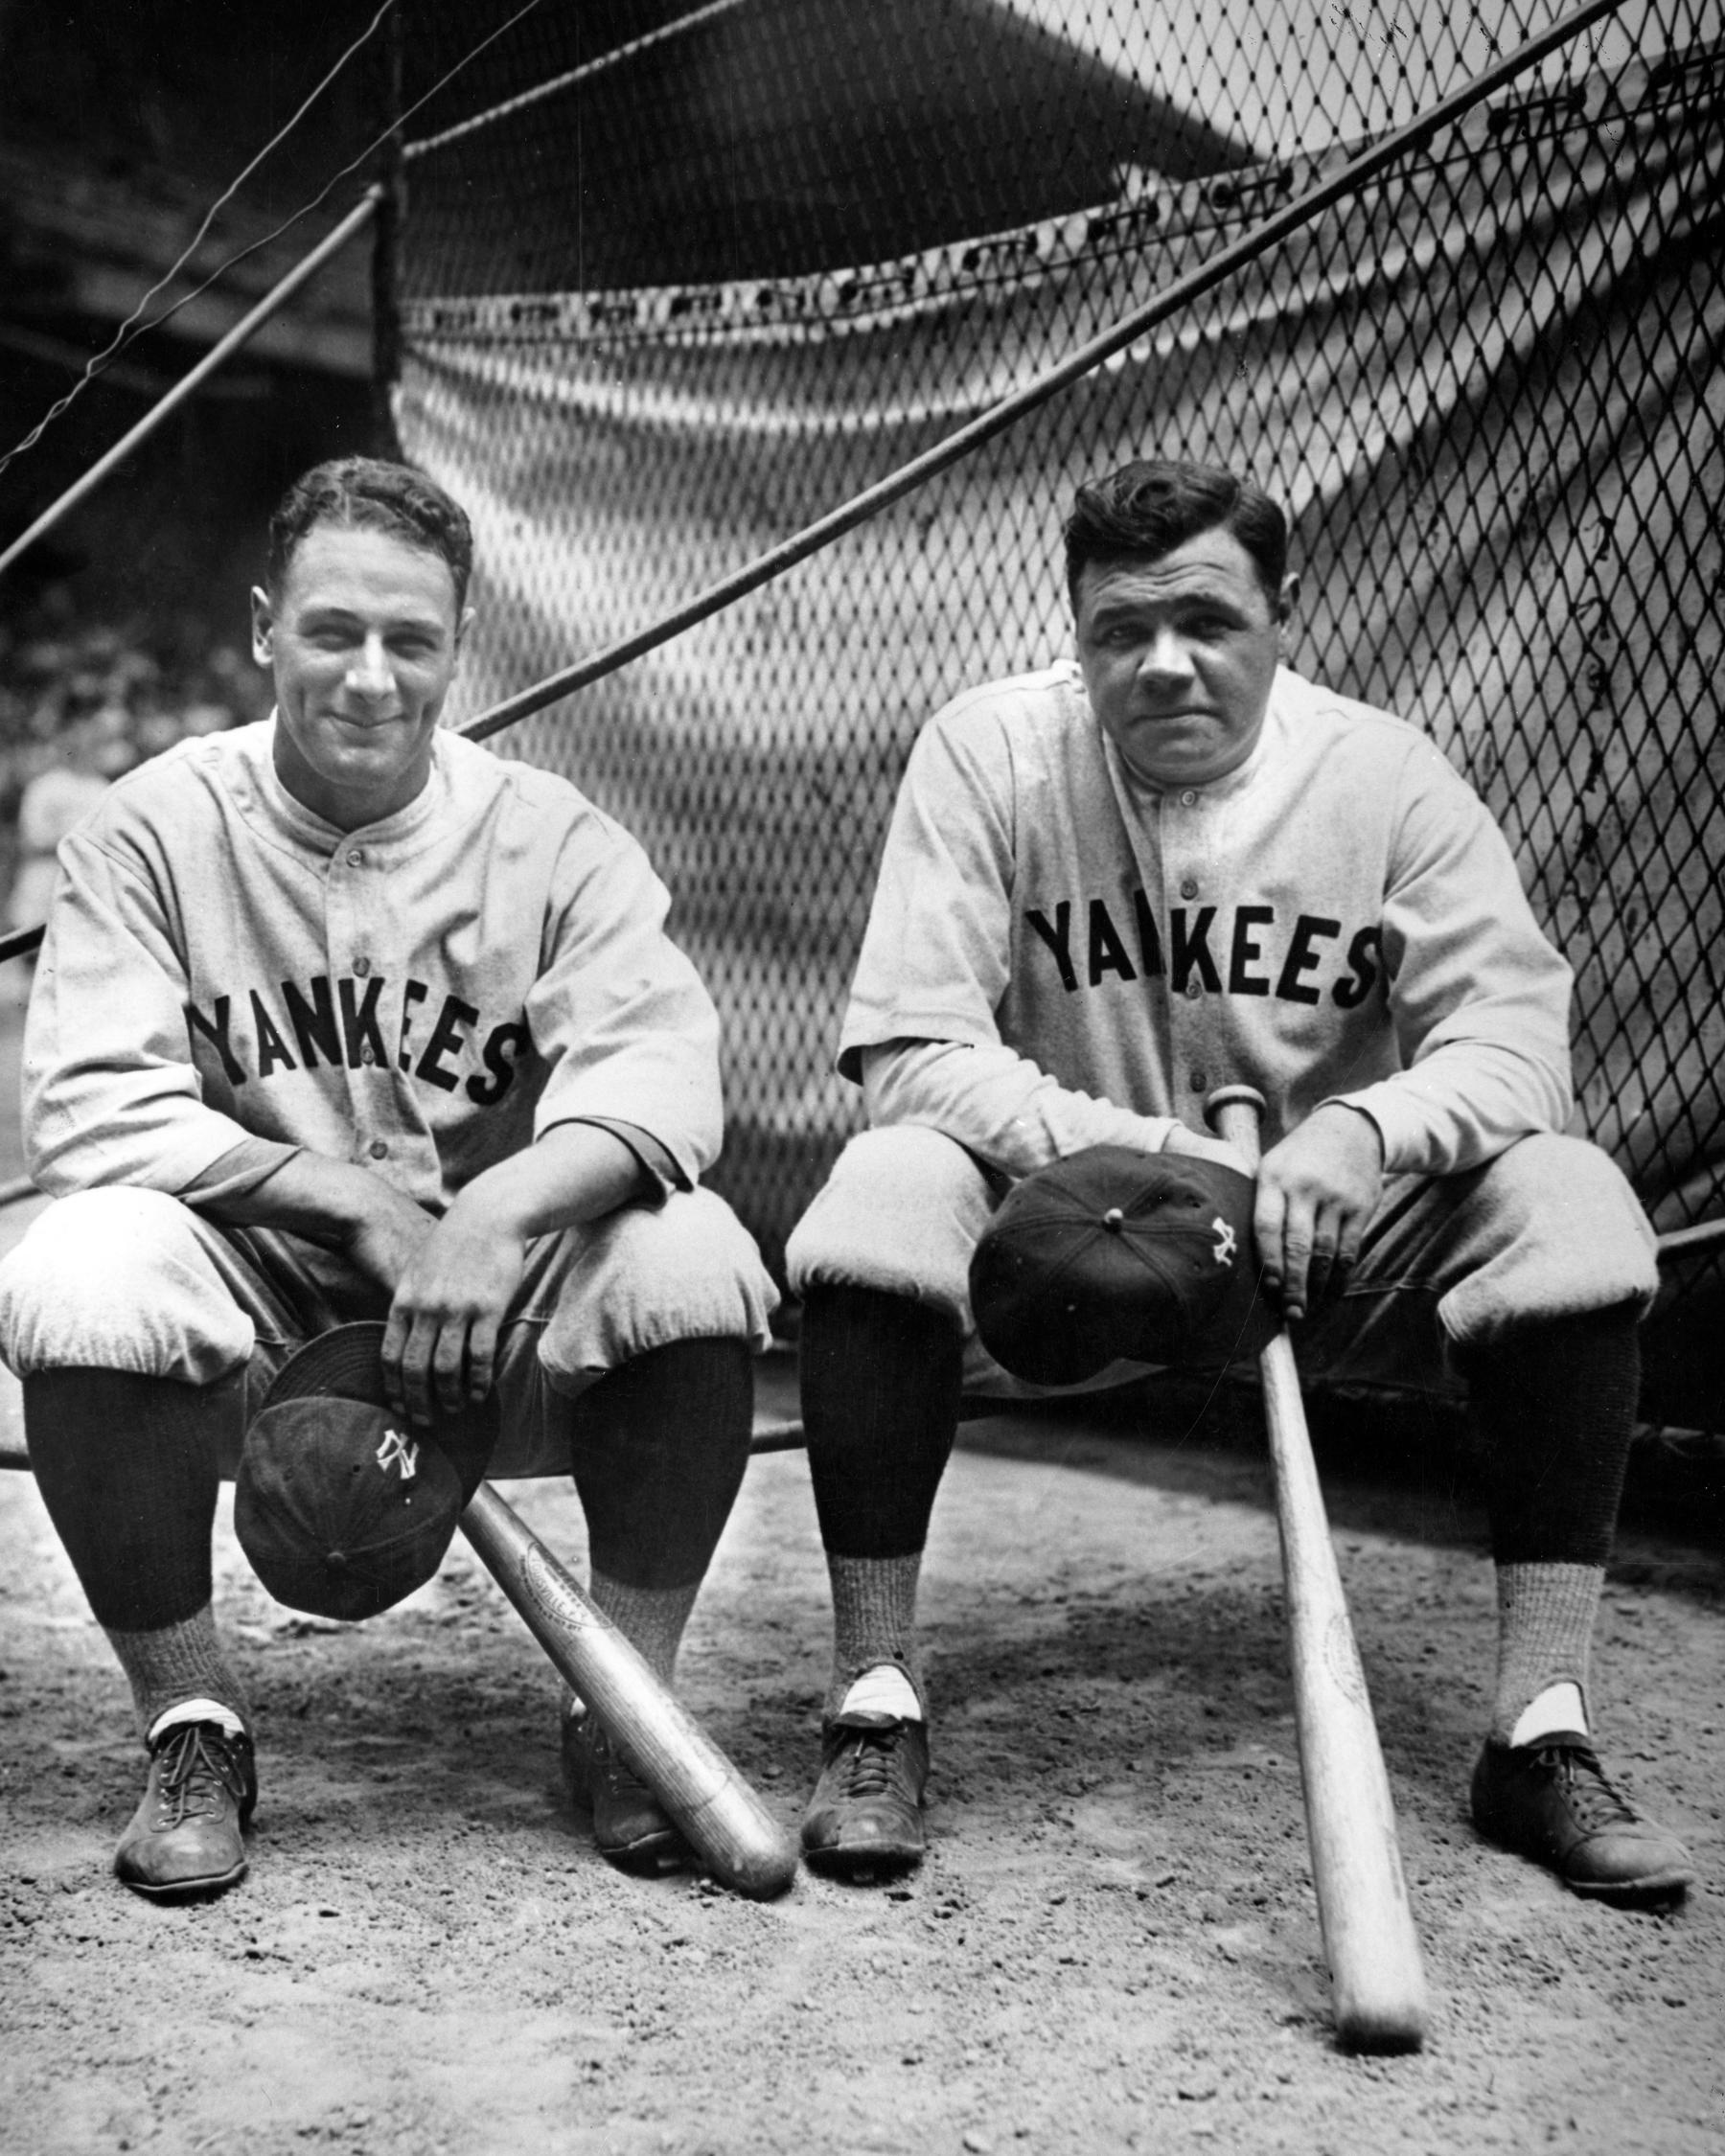 Babe Ruth and Lou Gehrig of the Yankees with Carl Reynolds of the